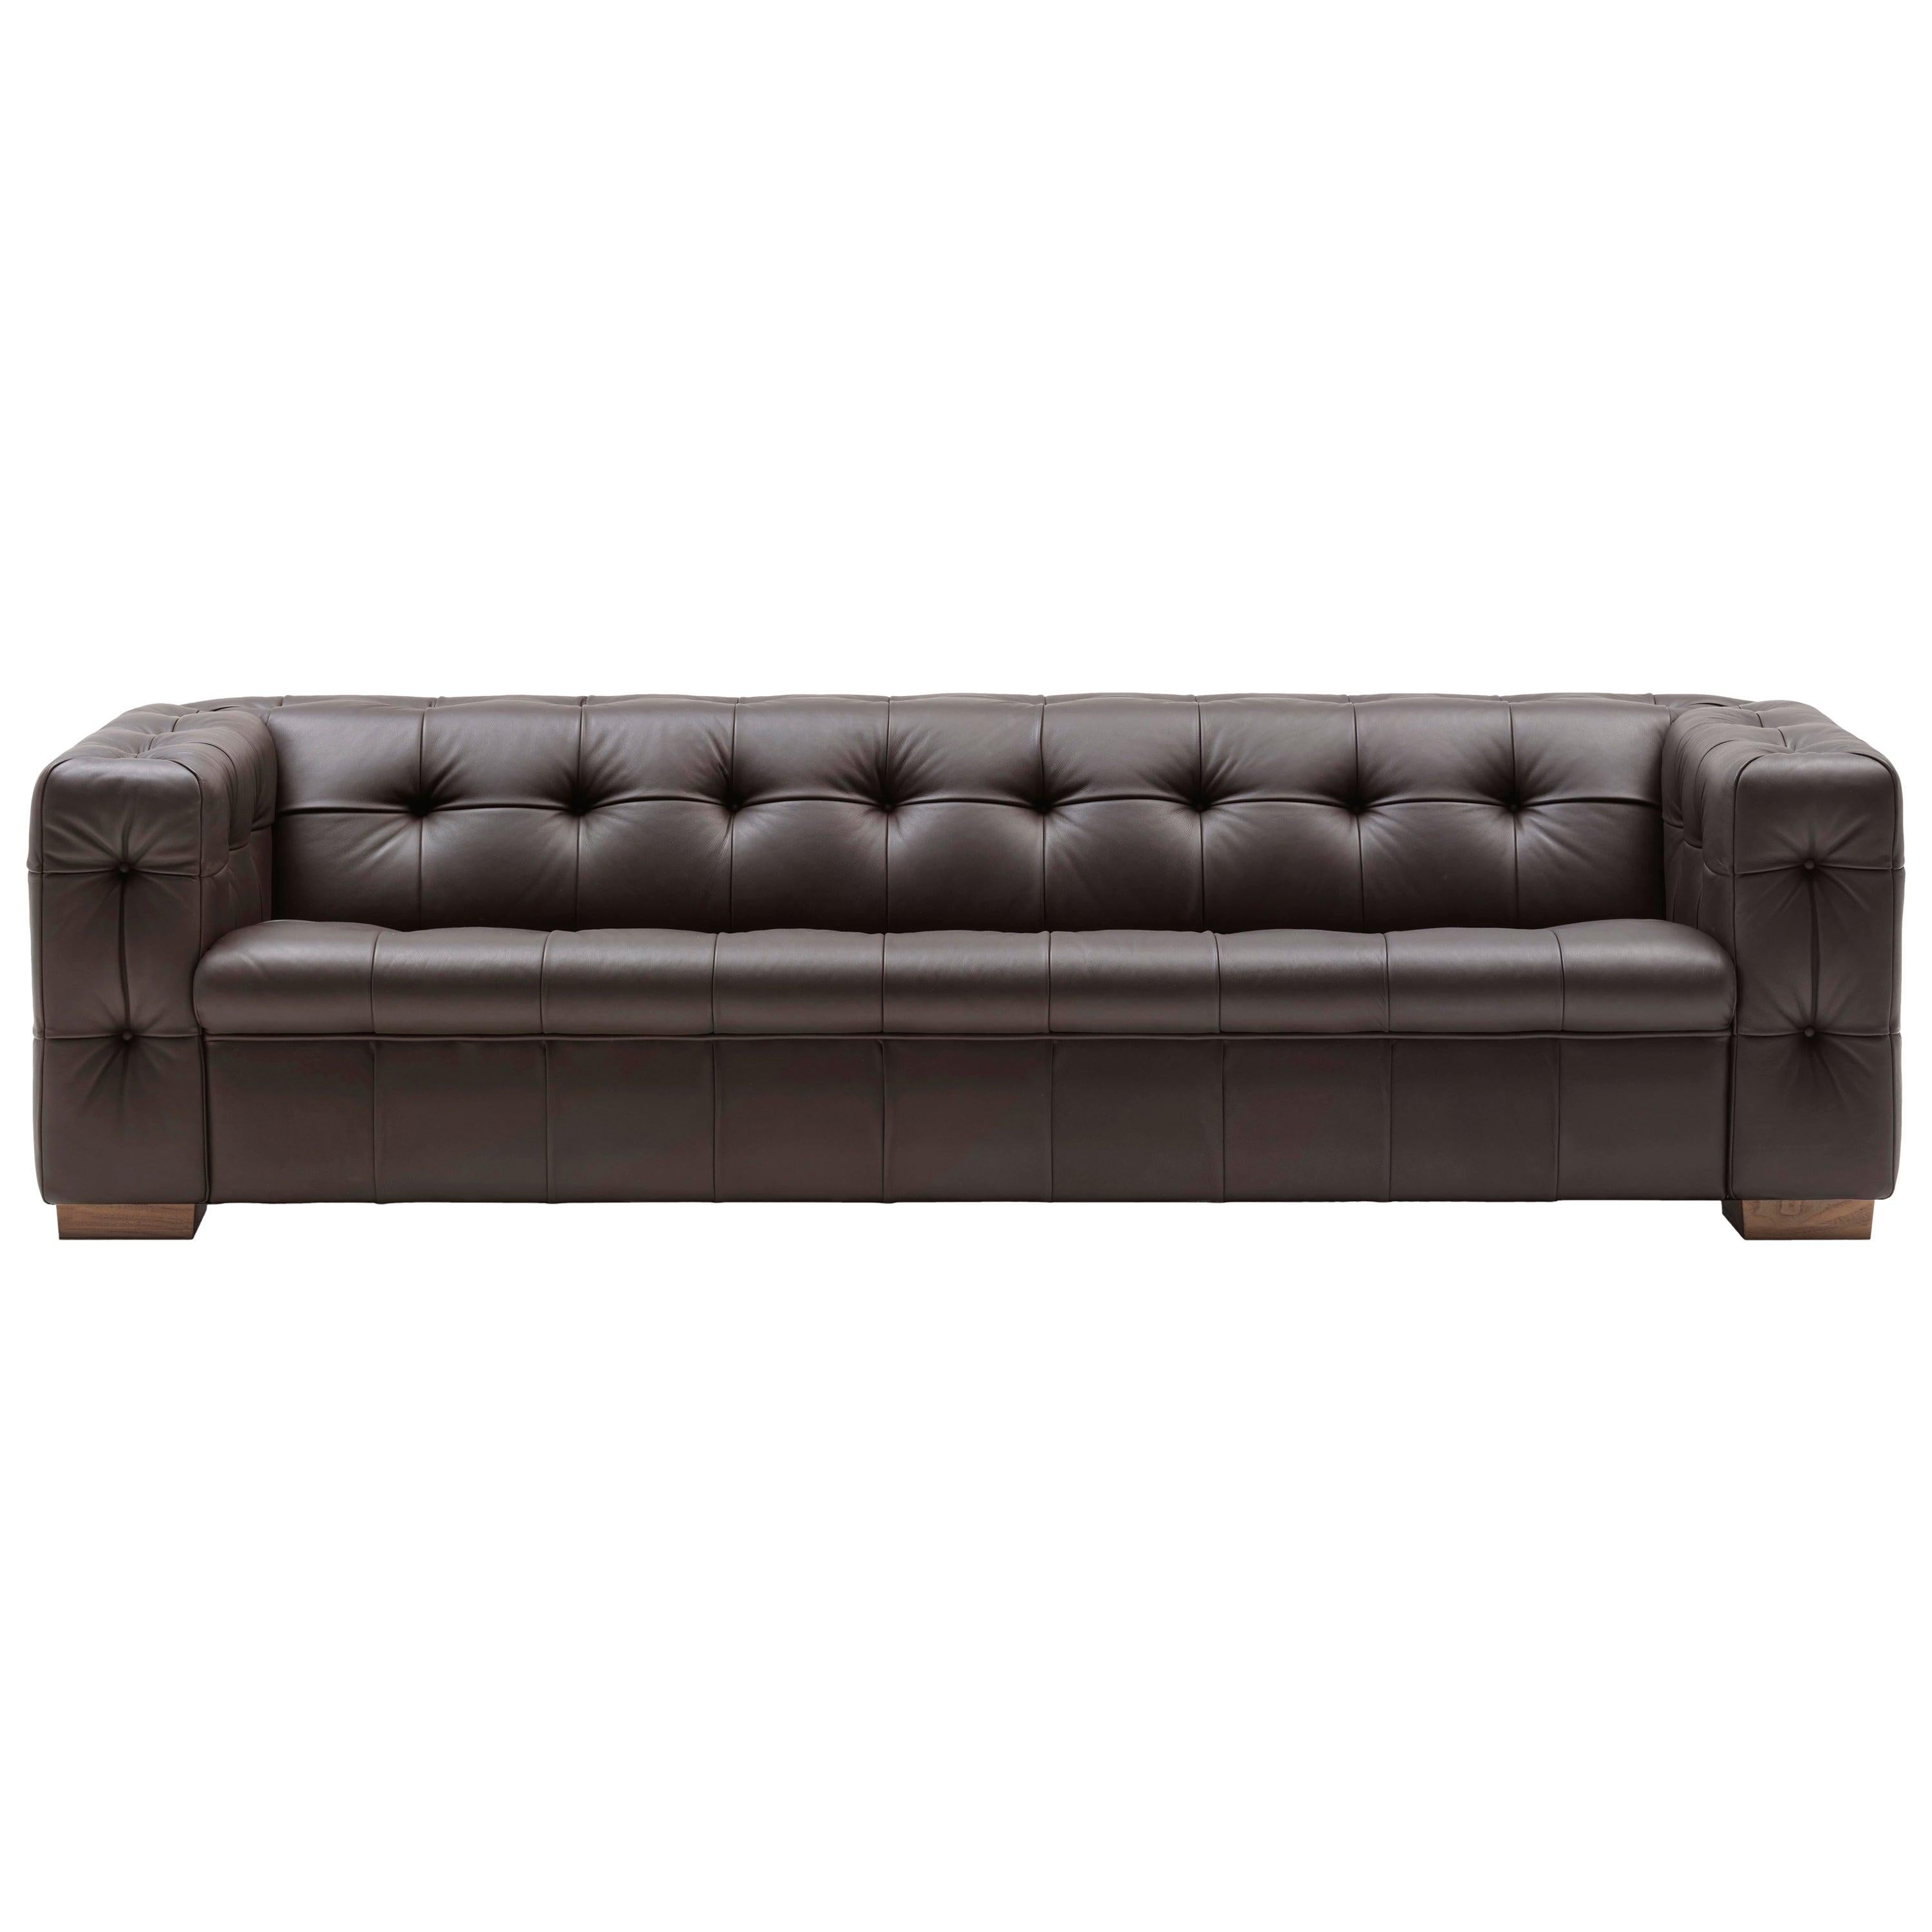 For Sale:  (Brown) RH-306 Large Tufted Leather Chesterfield Sofa by Robert Haussmann